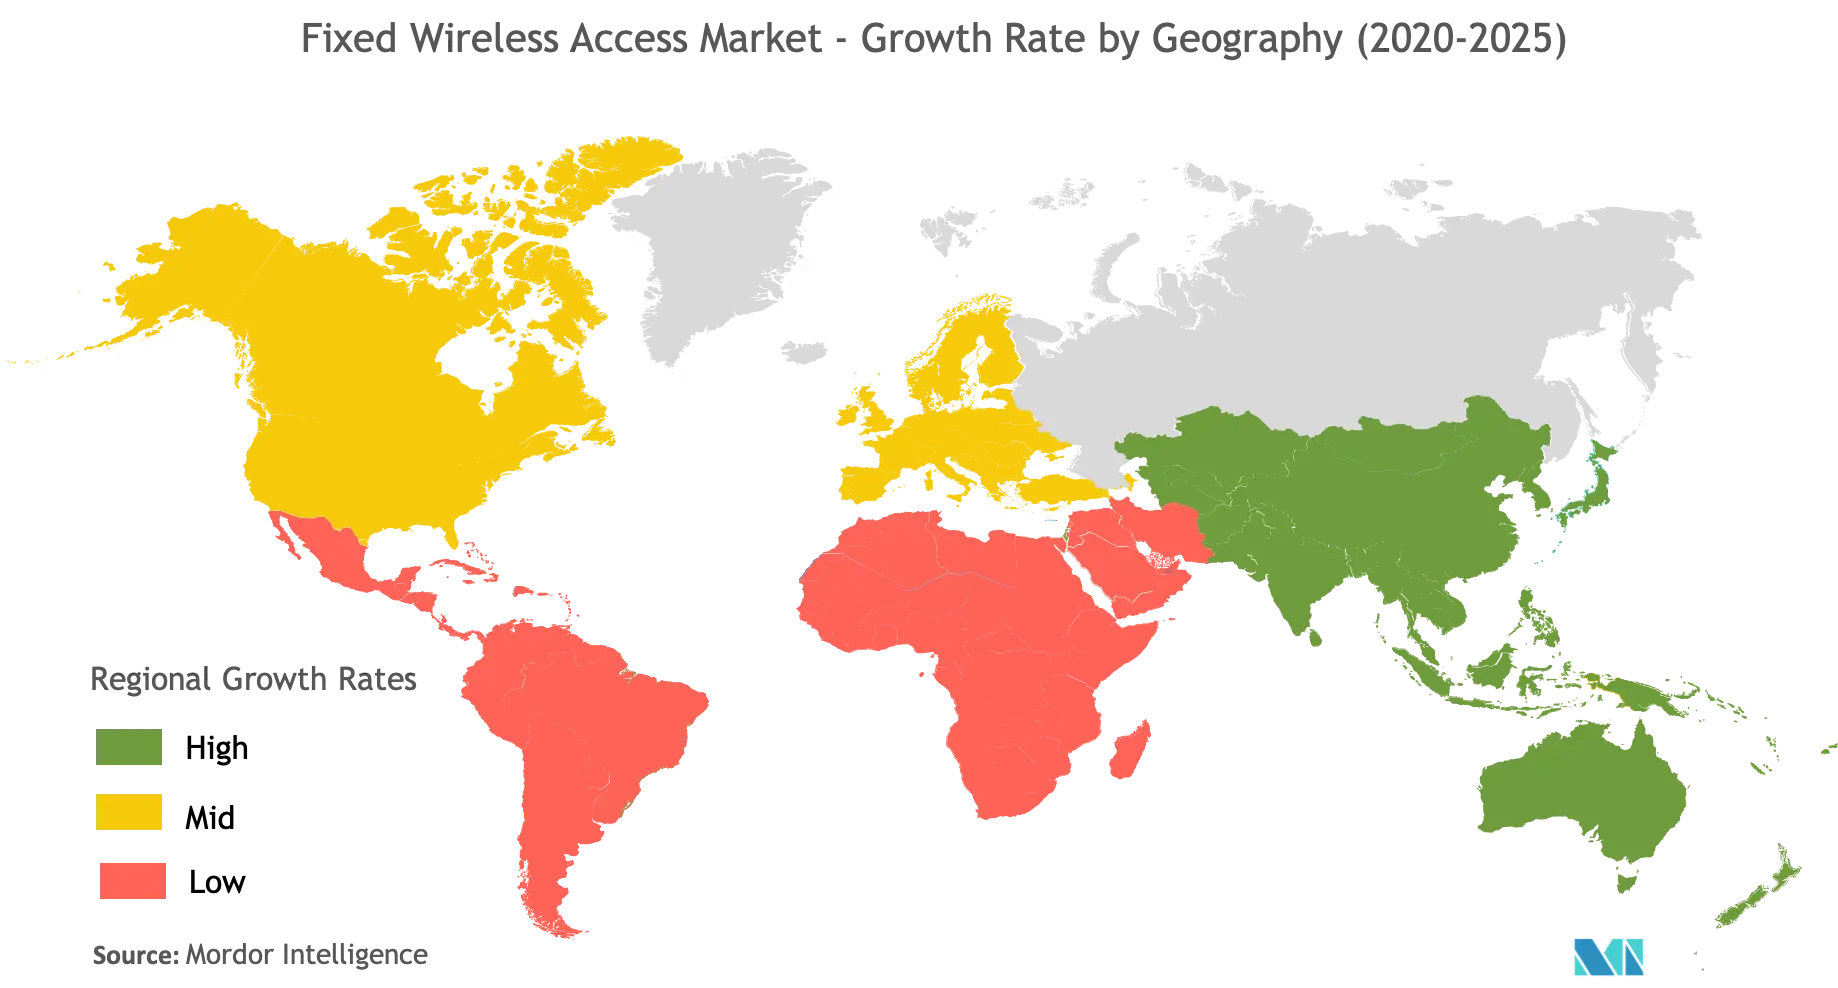 Fixed Wireless Access Market : Growth Rate by Geography (2020-2025)